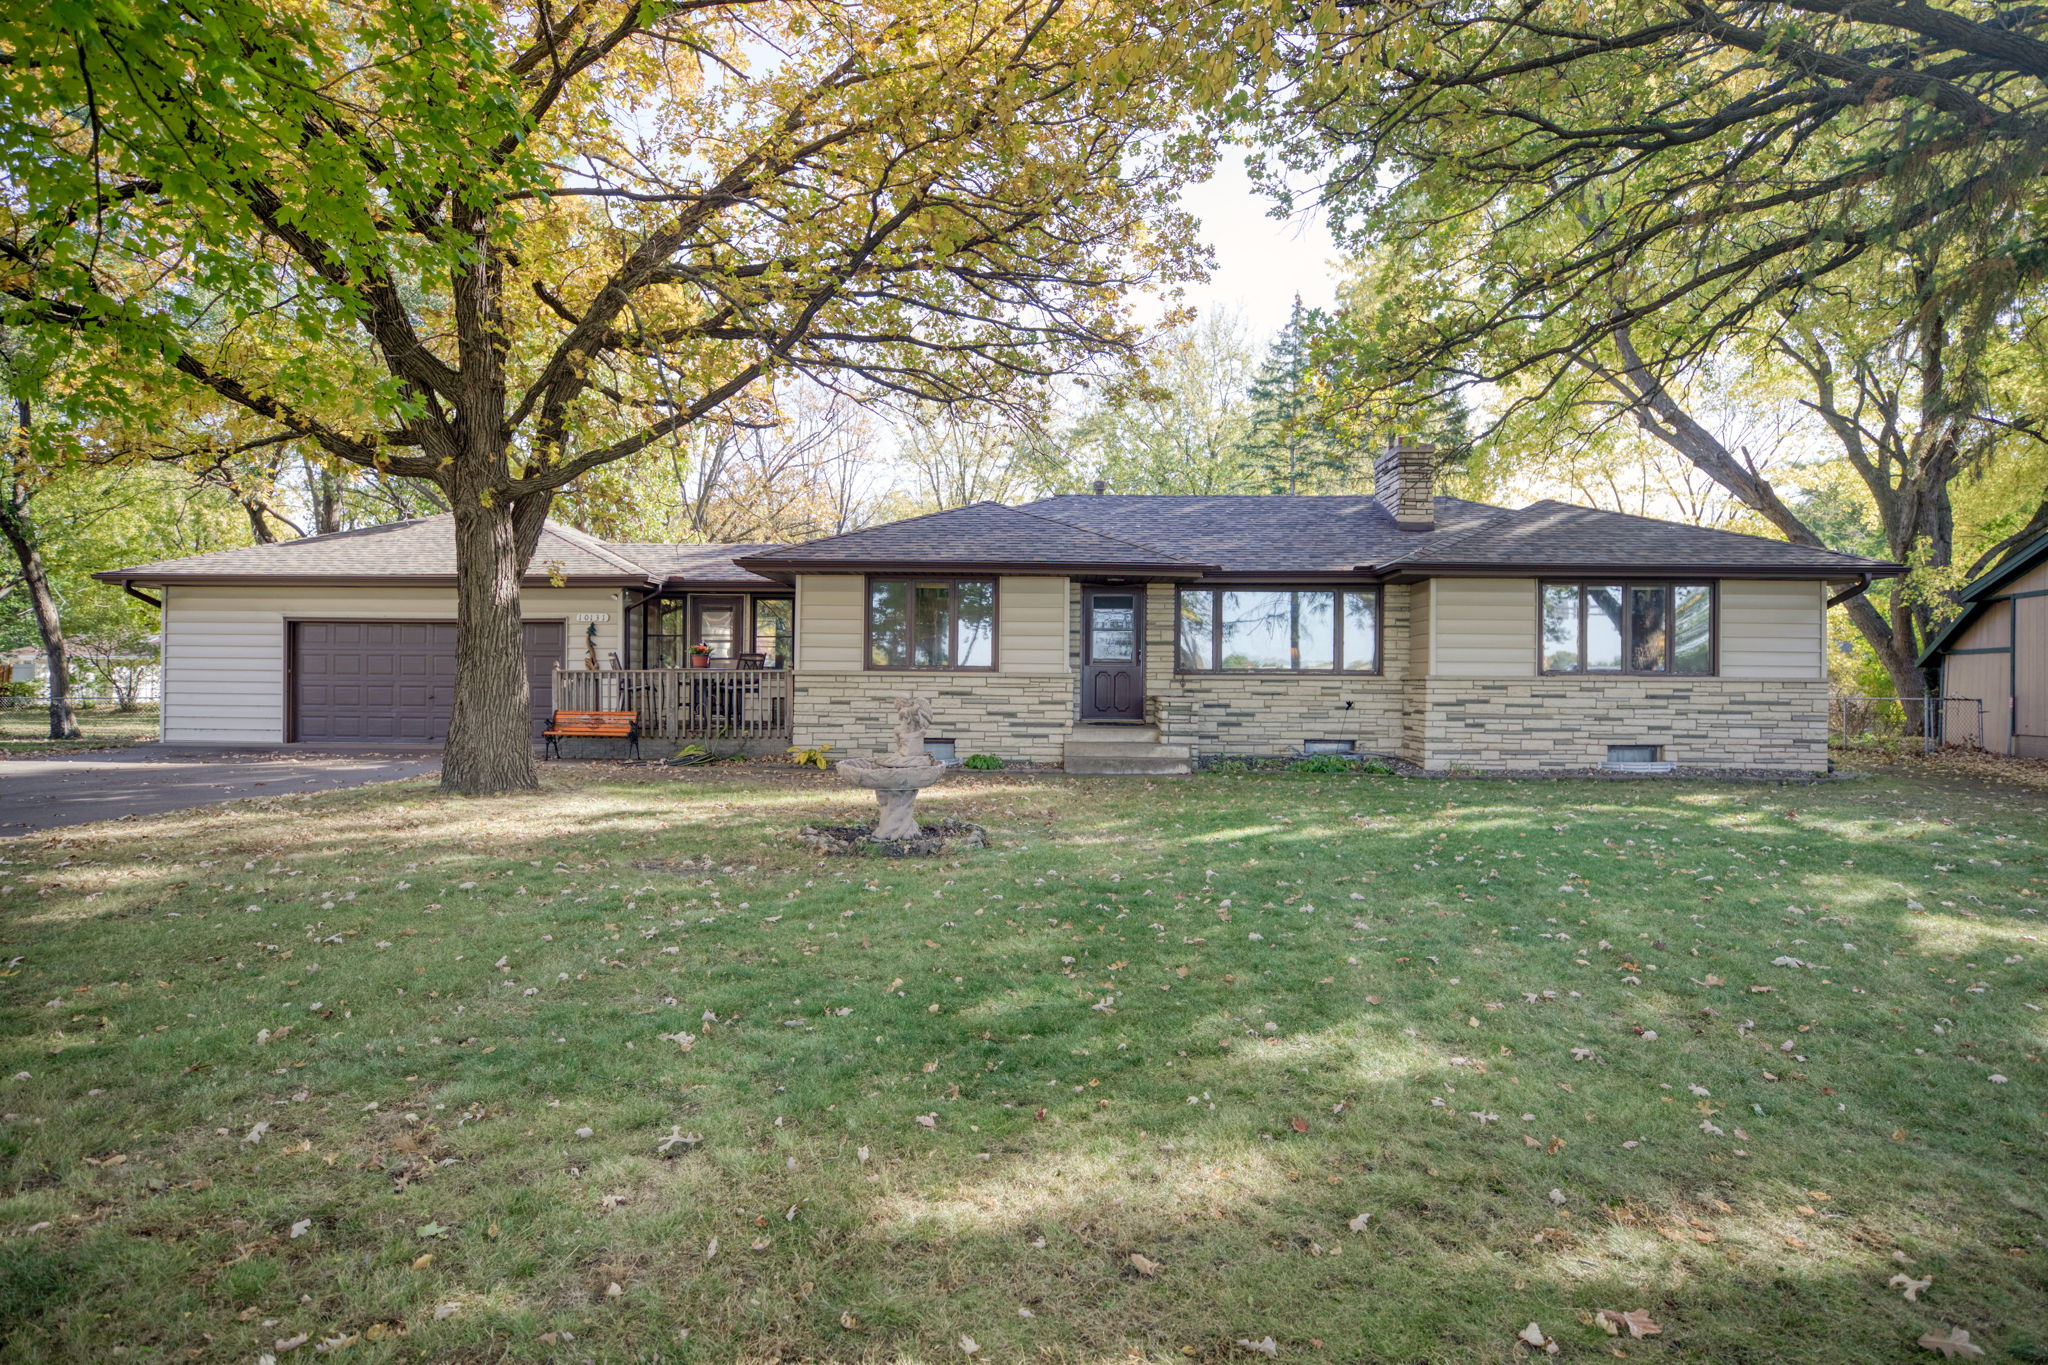  10131 Foley Blvd NW, Coon Rapids, MN 55448, US Photo 26